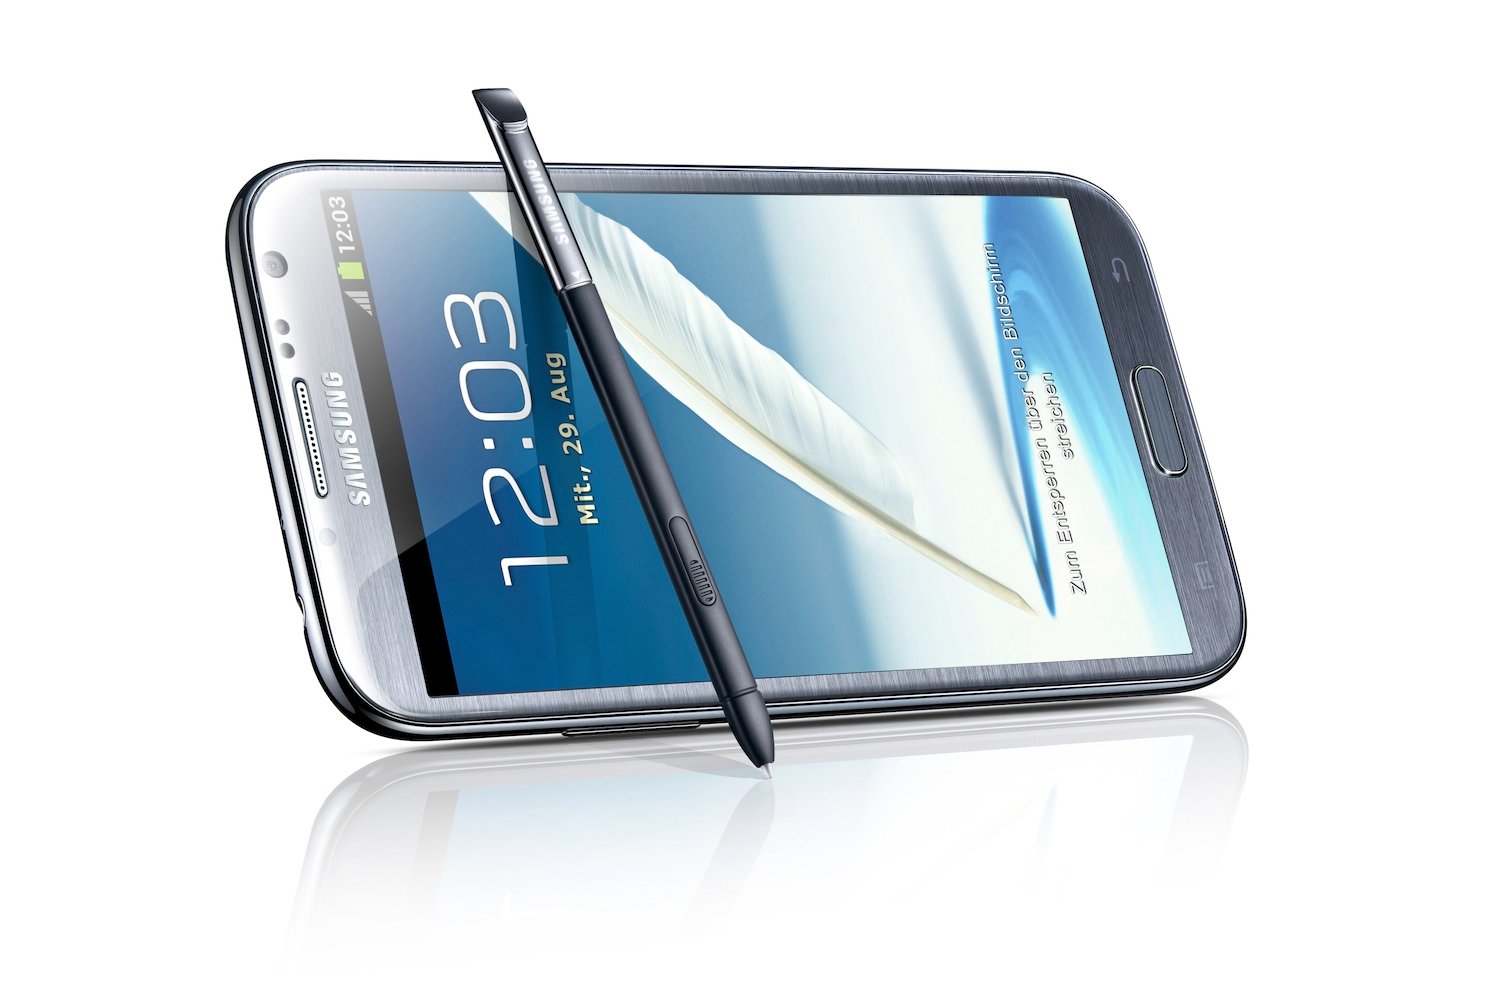 Samsung Galaxy Note II N7100 Review and Specification